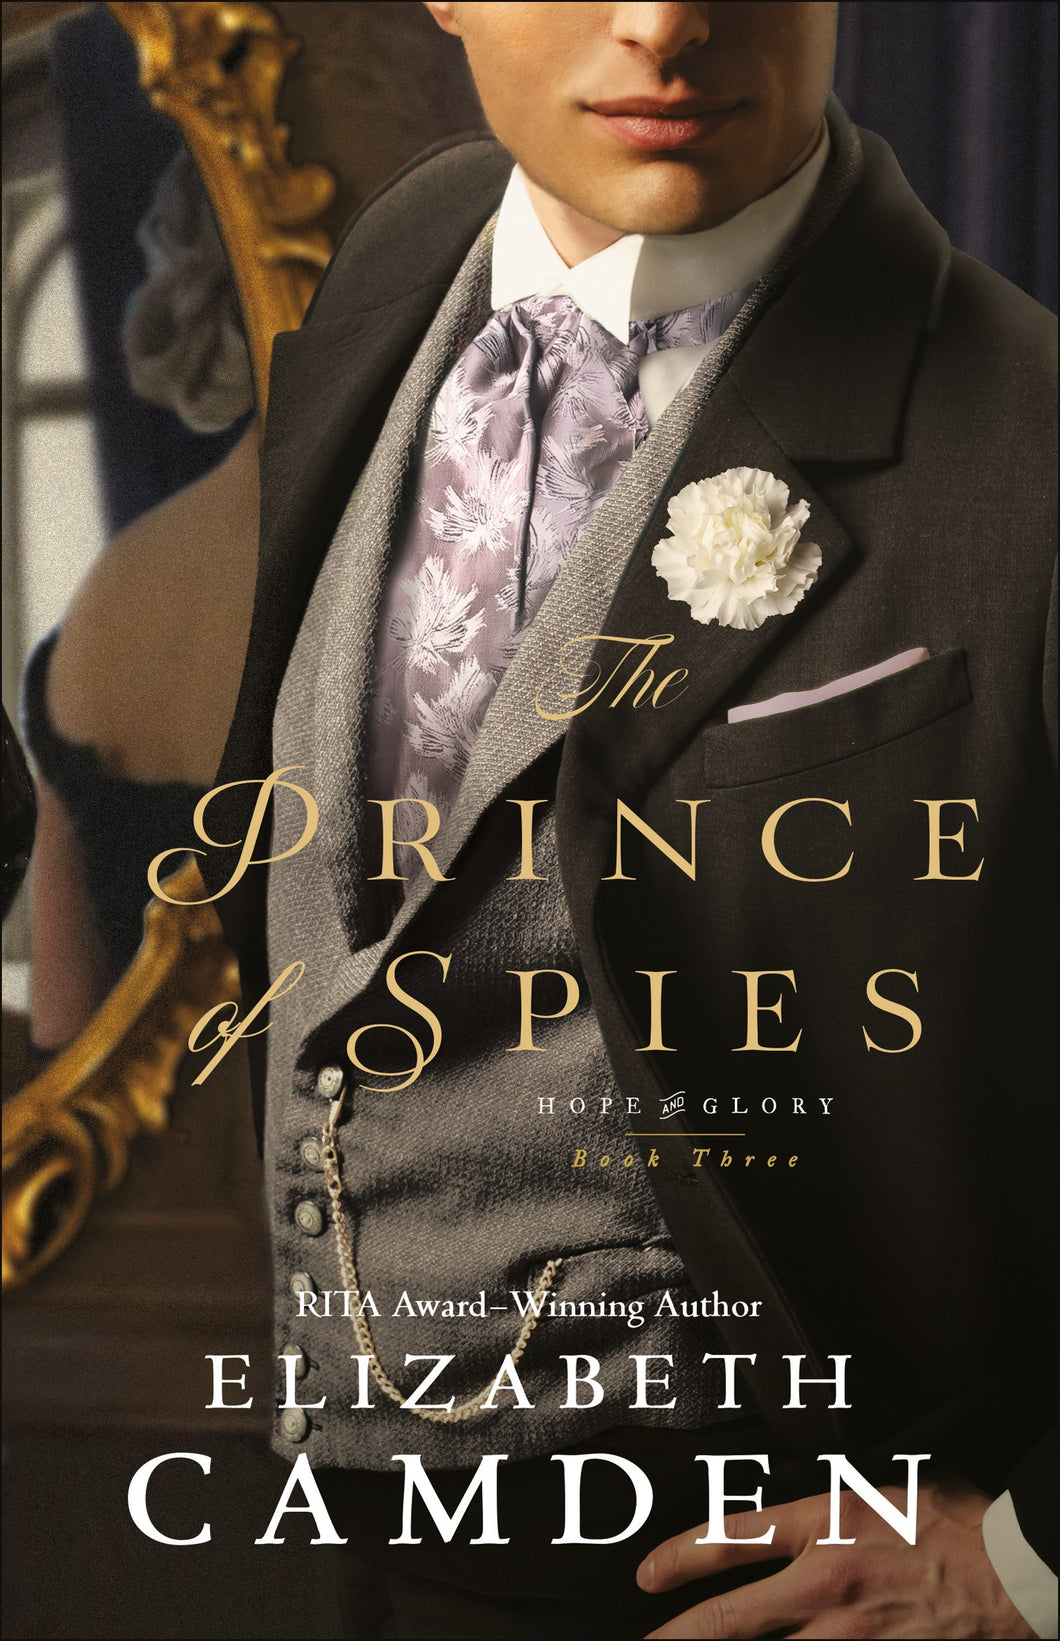 The Prince Of Spies (Hope And Glory #3)